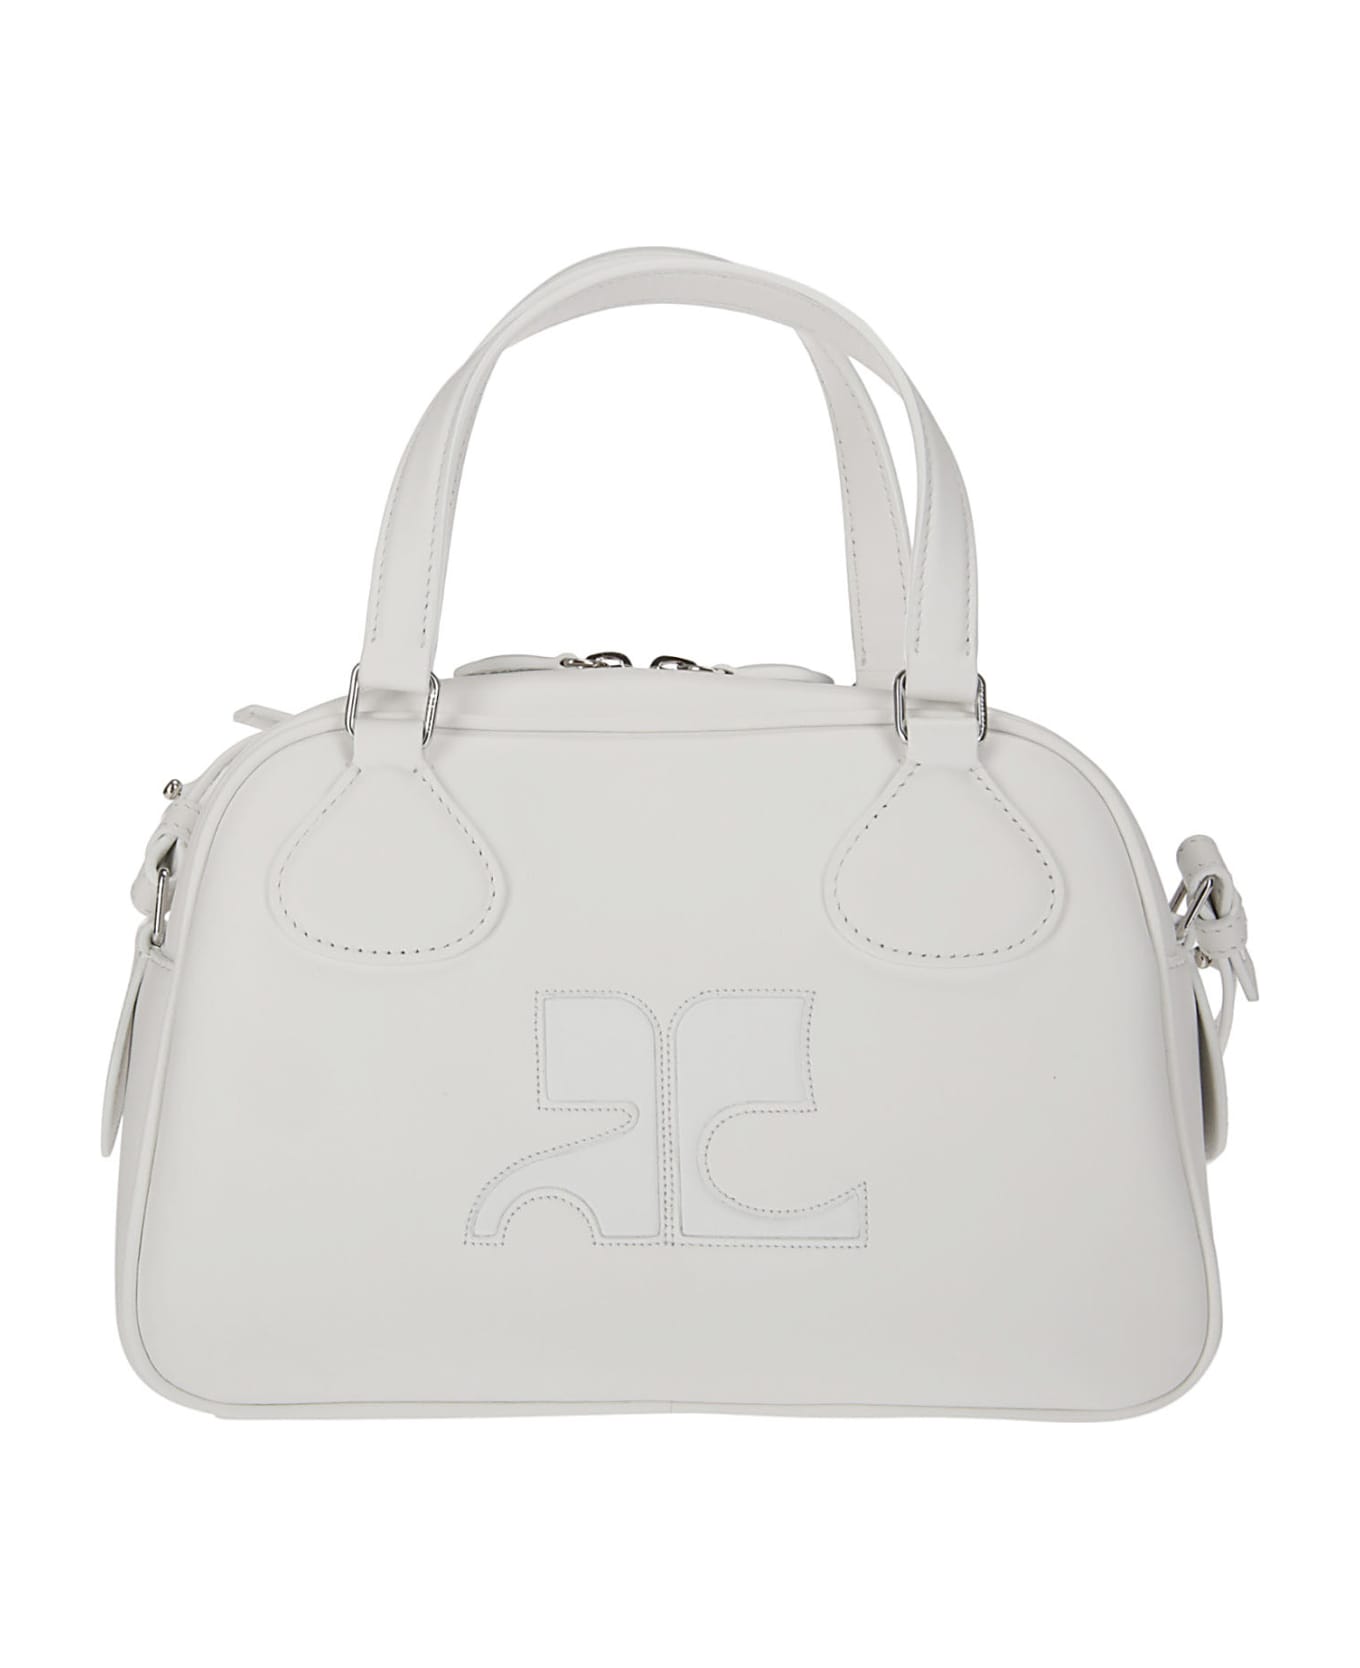 Courrèges Reedition Bowling Bag - HERITAGE WHITE